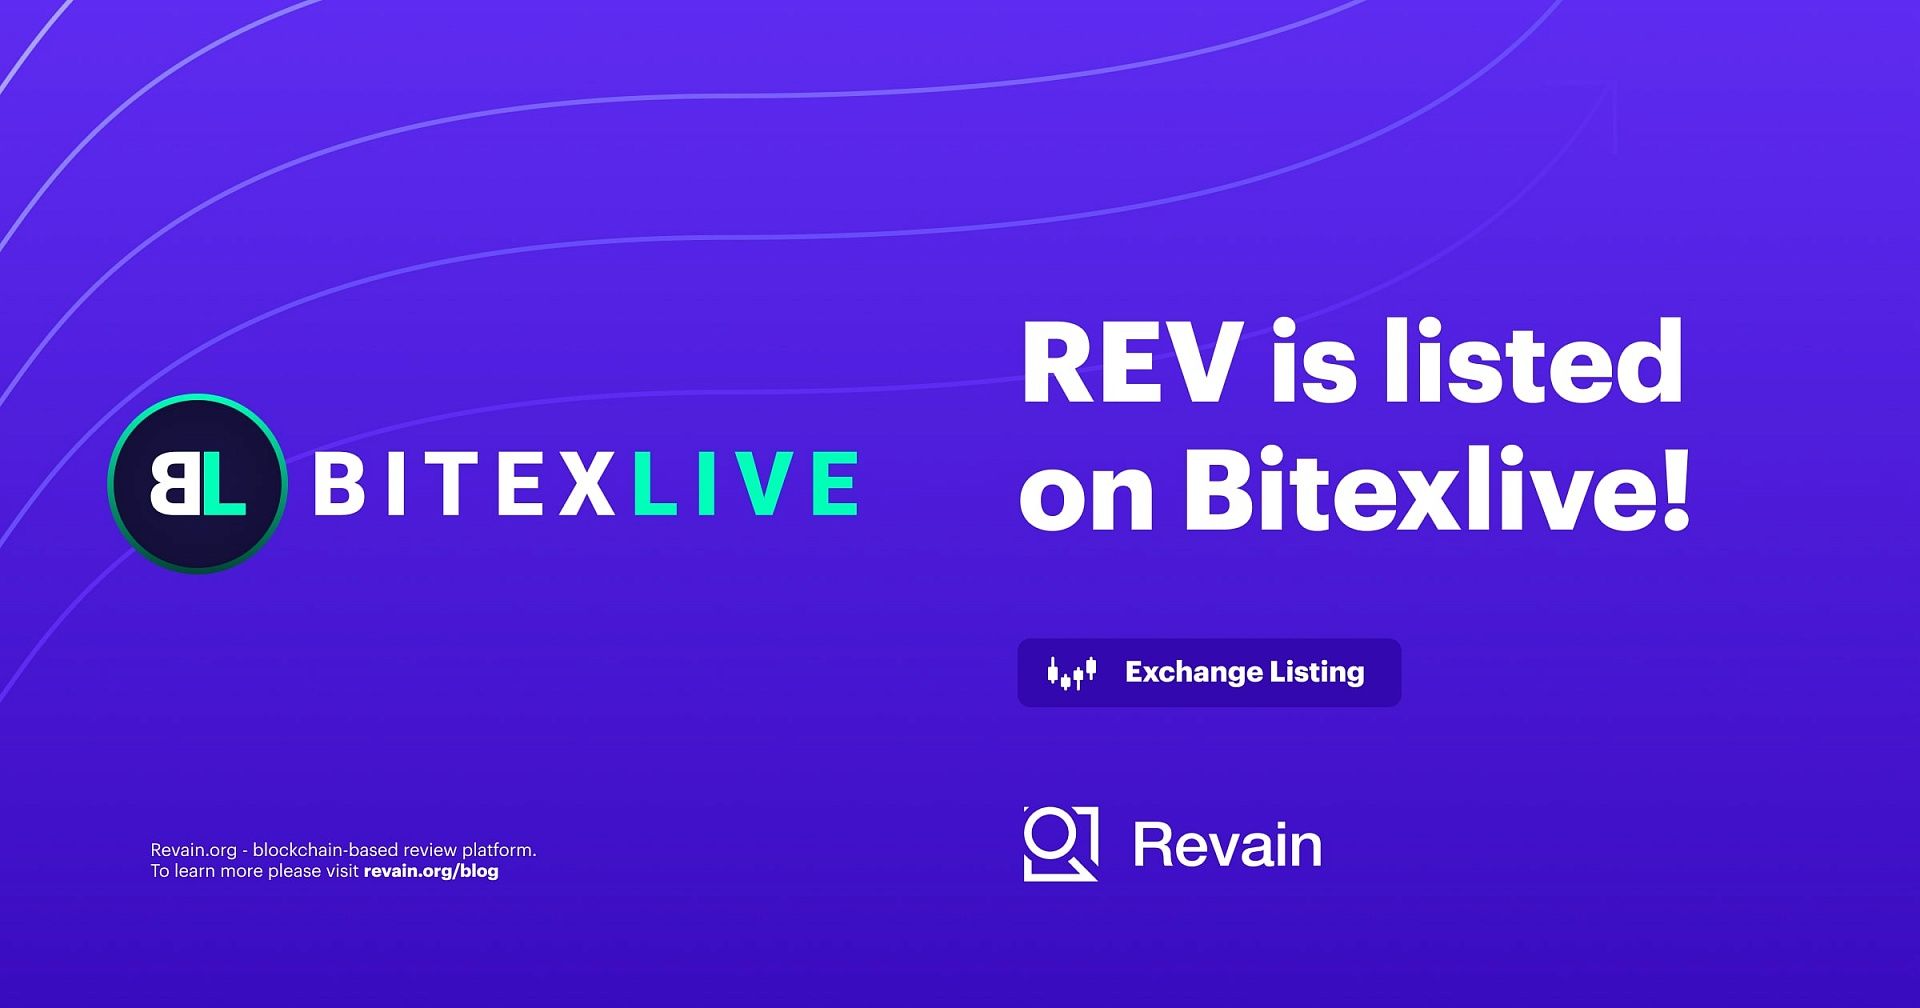 REV is listed on the Bitexlive exchange